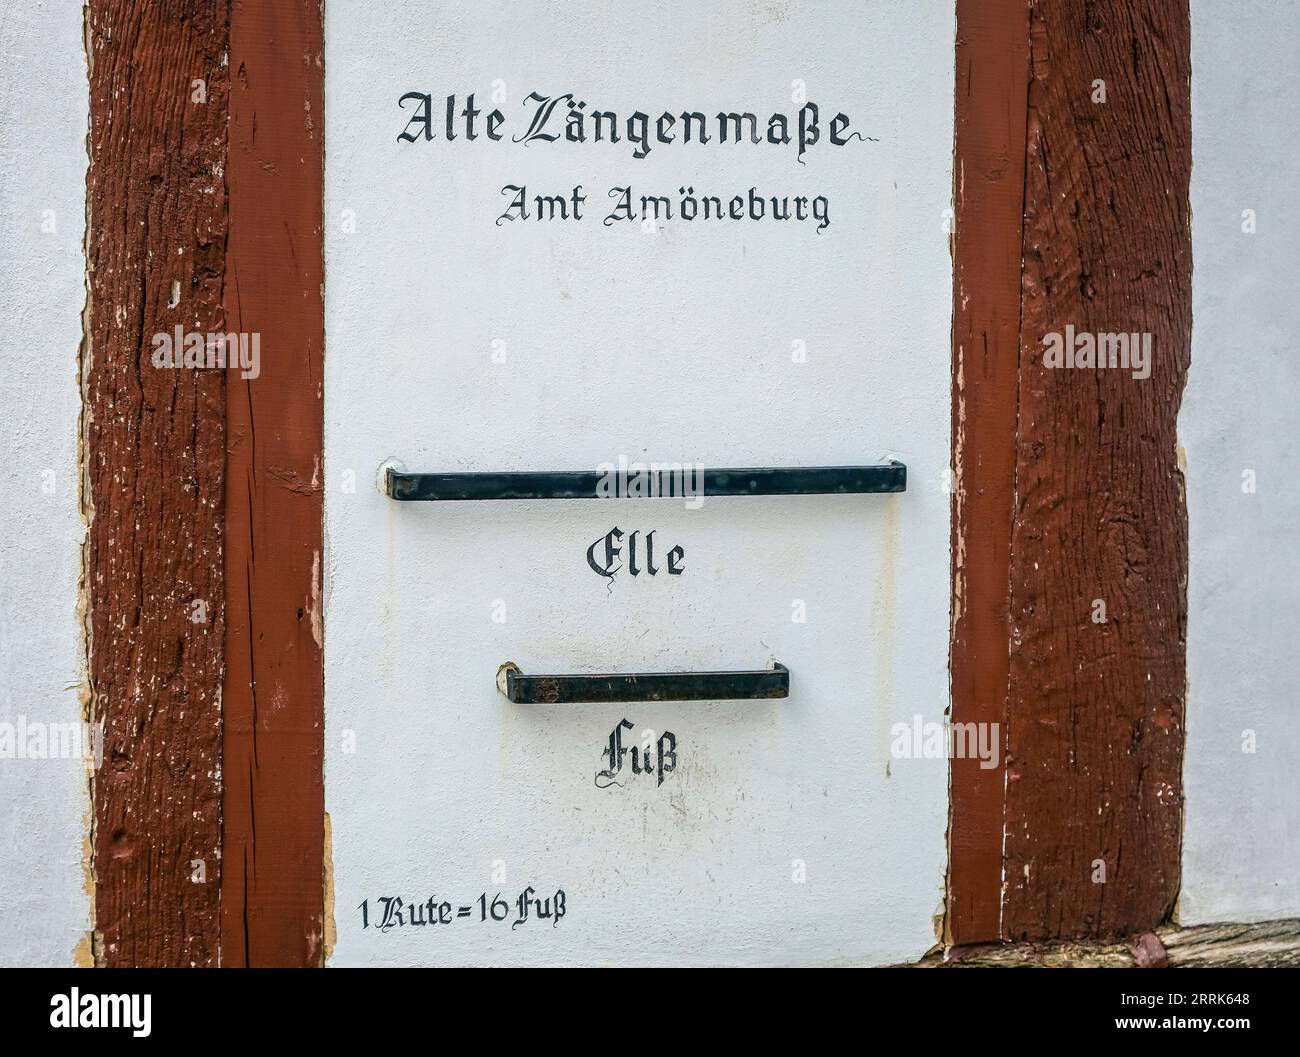 Amöneburg, Hesse, Germany - On the facade of the town museum Amt Amöneburg are the length measures of ELLE and FUSS. Amöneburg is a small town in the central Hessian district Marburg-Biedenkopf. It is located on the 365 m high mountain Amöneburg with the castle Amöneburg at the top. Stock Photo